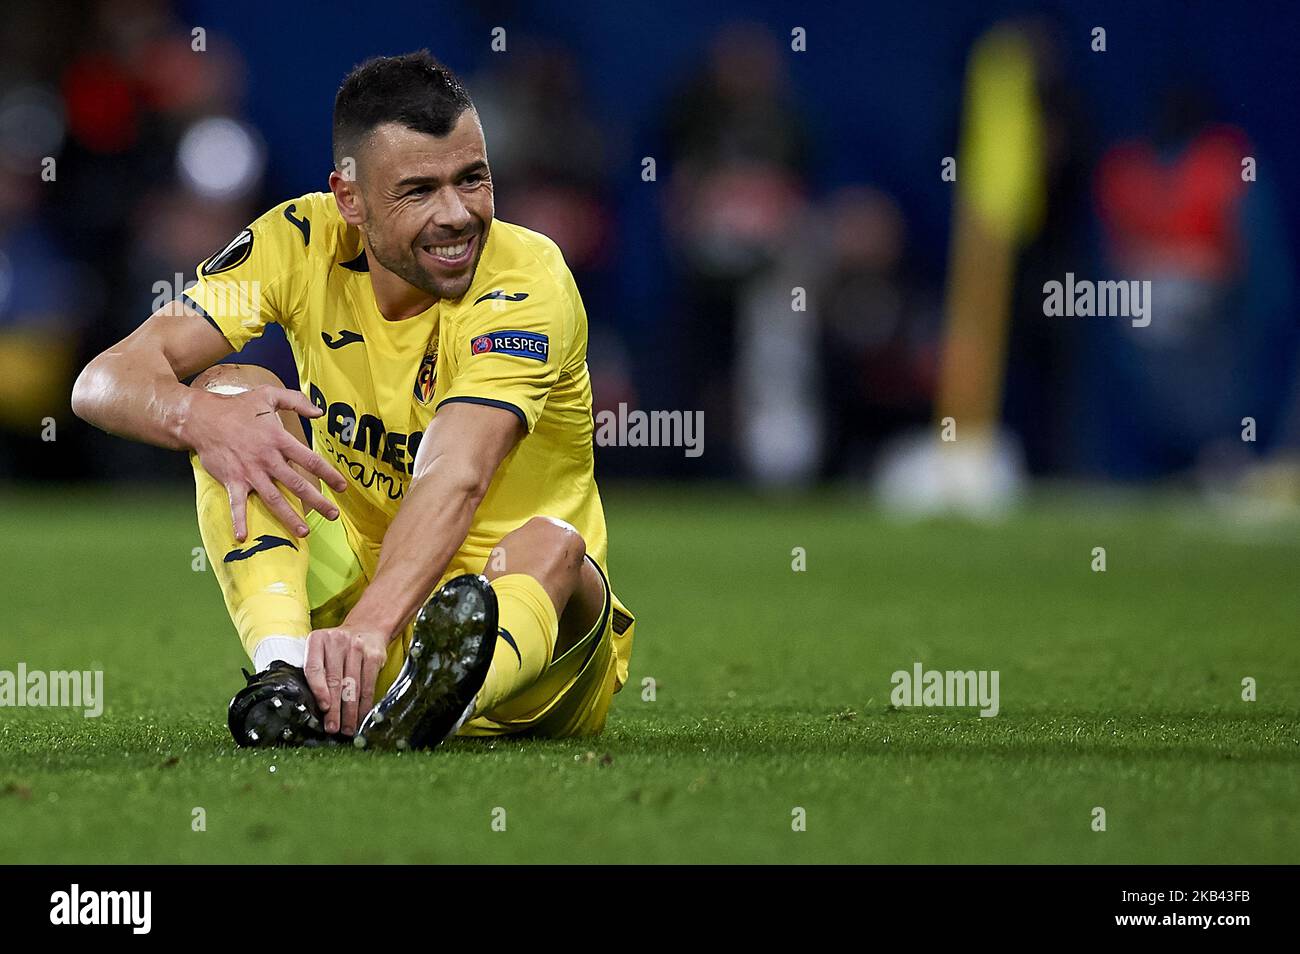 Javi Fuego of Villarreal lies injured on the pitch during the Group G match of the UEFA Europa League between Villarreal CF and Spartak Moskva at La Ceramica Stadium Villarreal, Spain on December 13, 2018. (Photo by Jose Breton/NurPhoto) Stock Photo